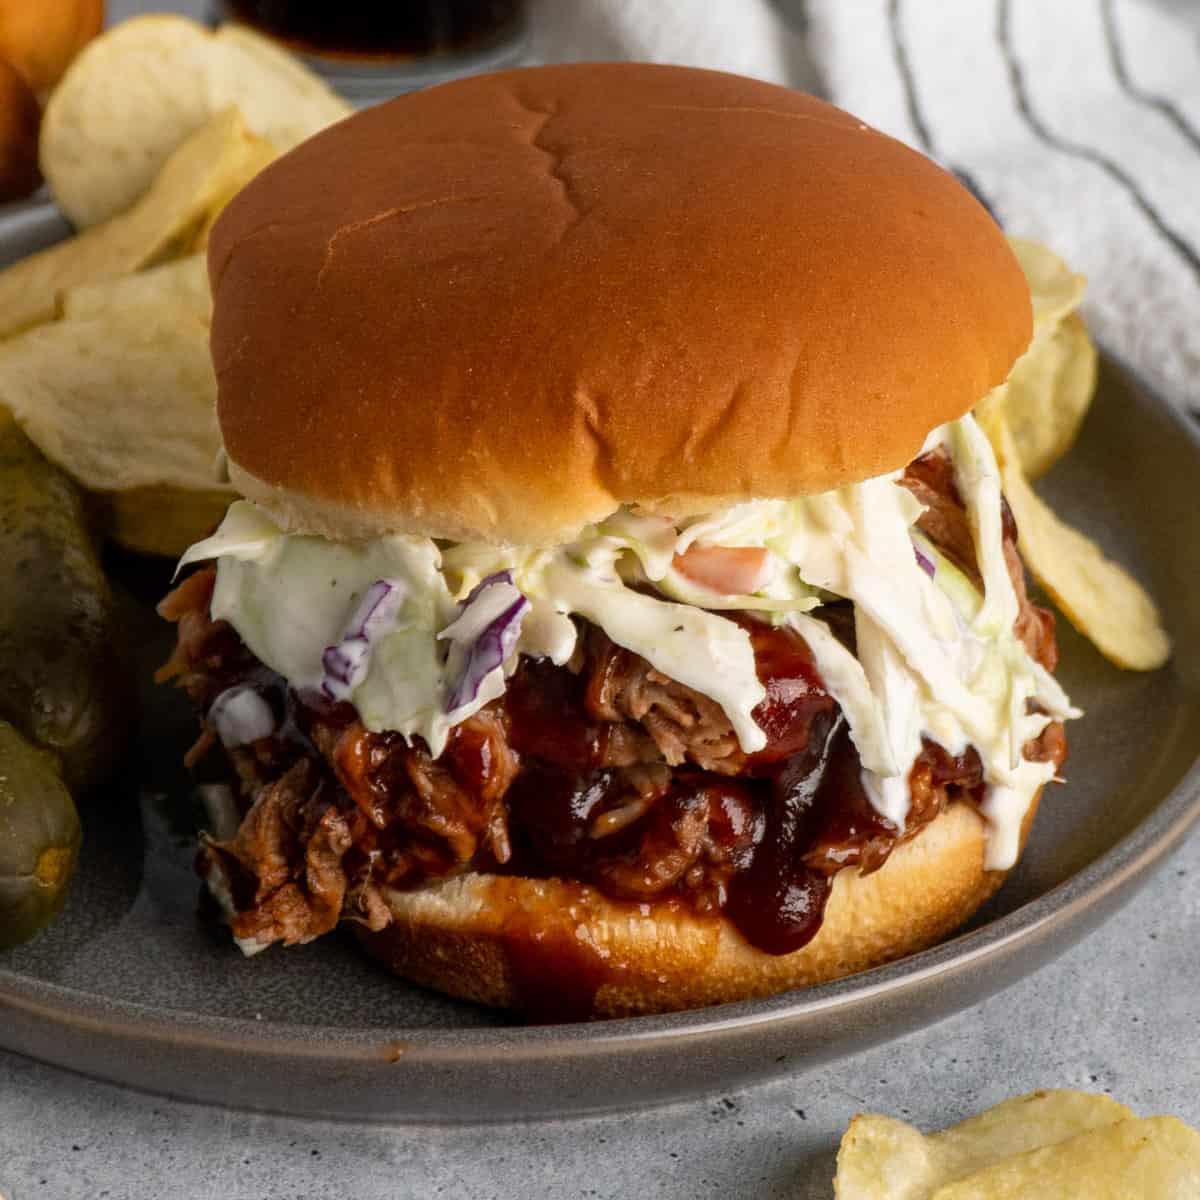 BBQ pulled pork on a bun with coleslaw.